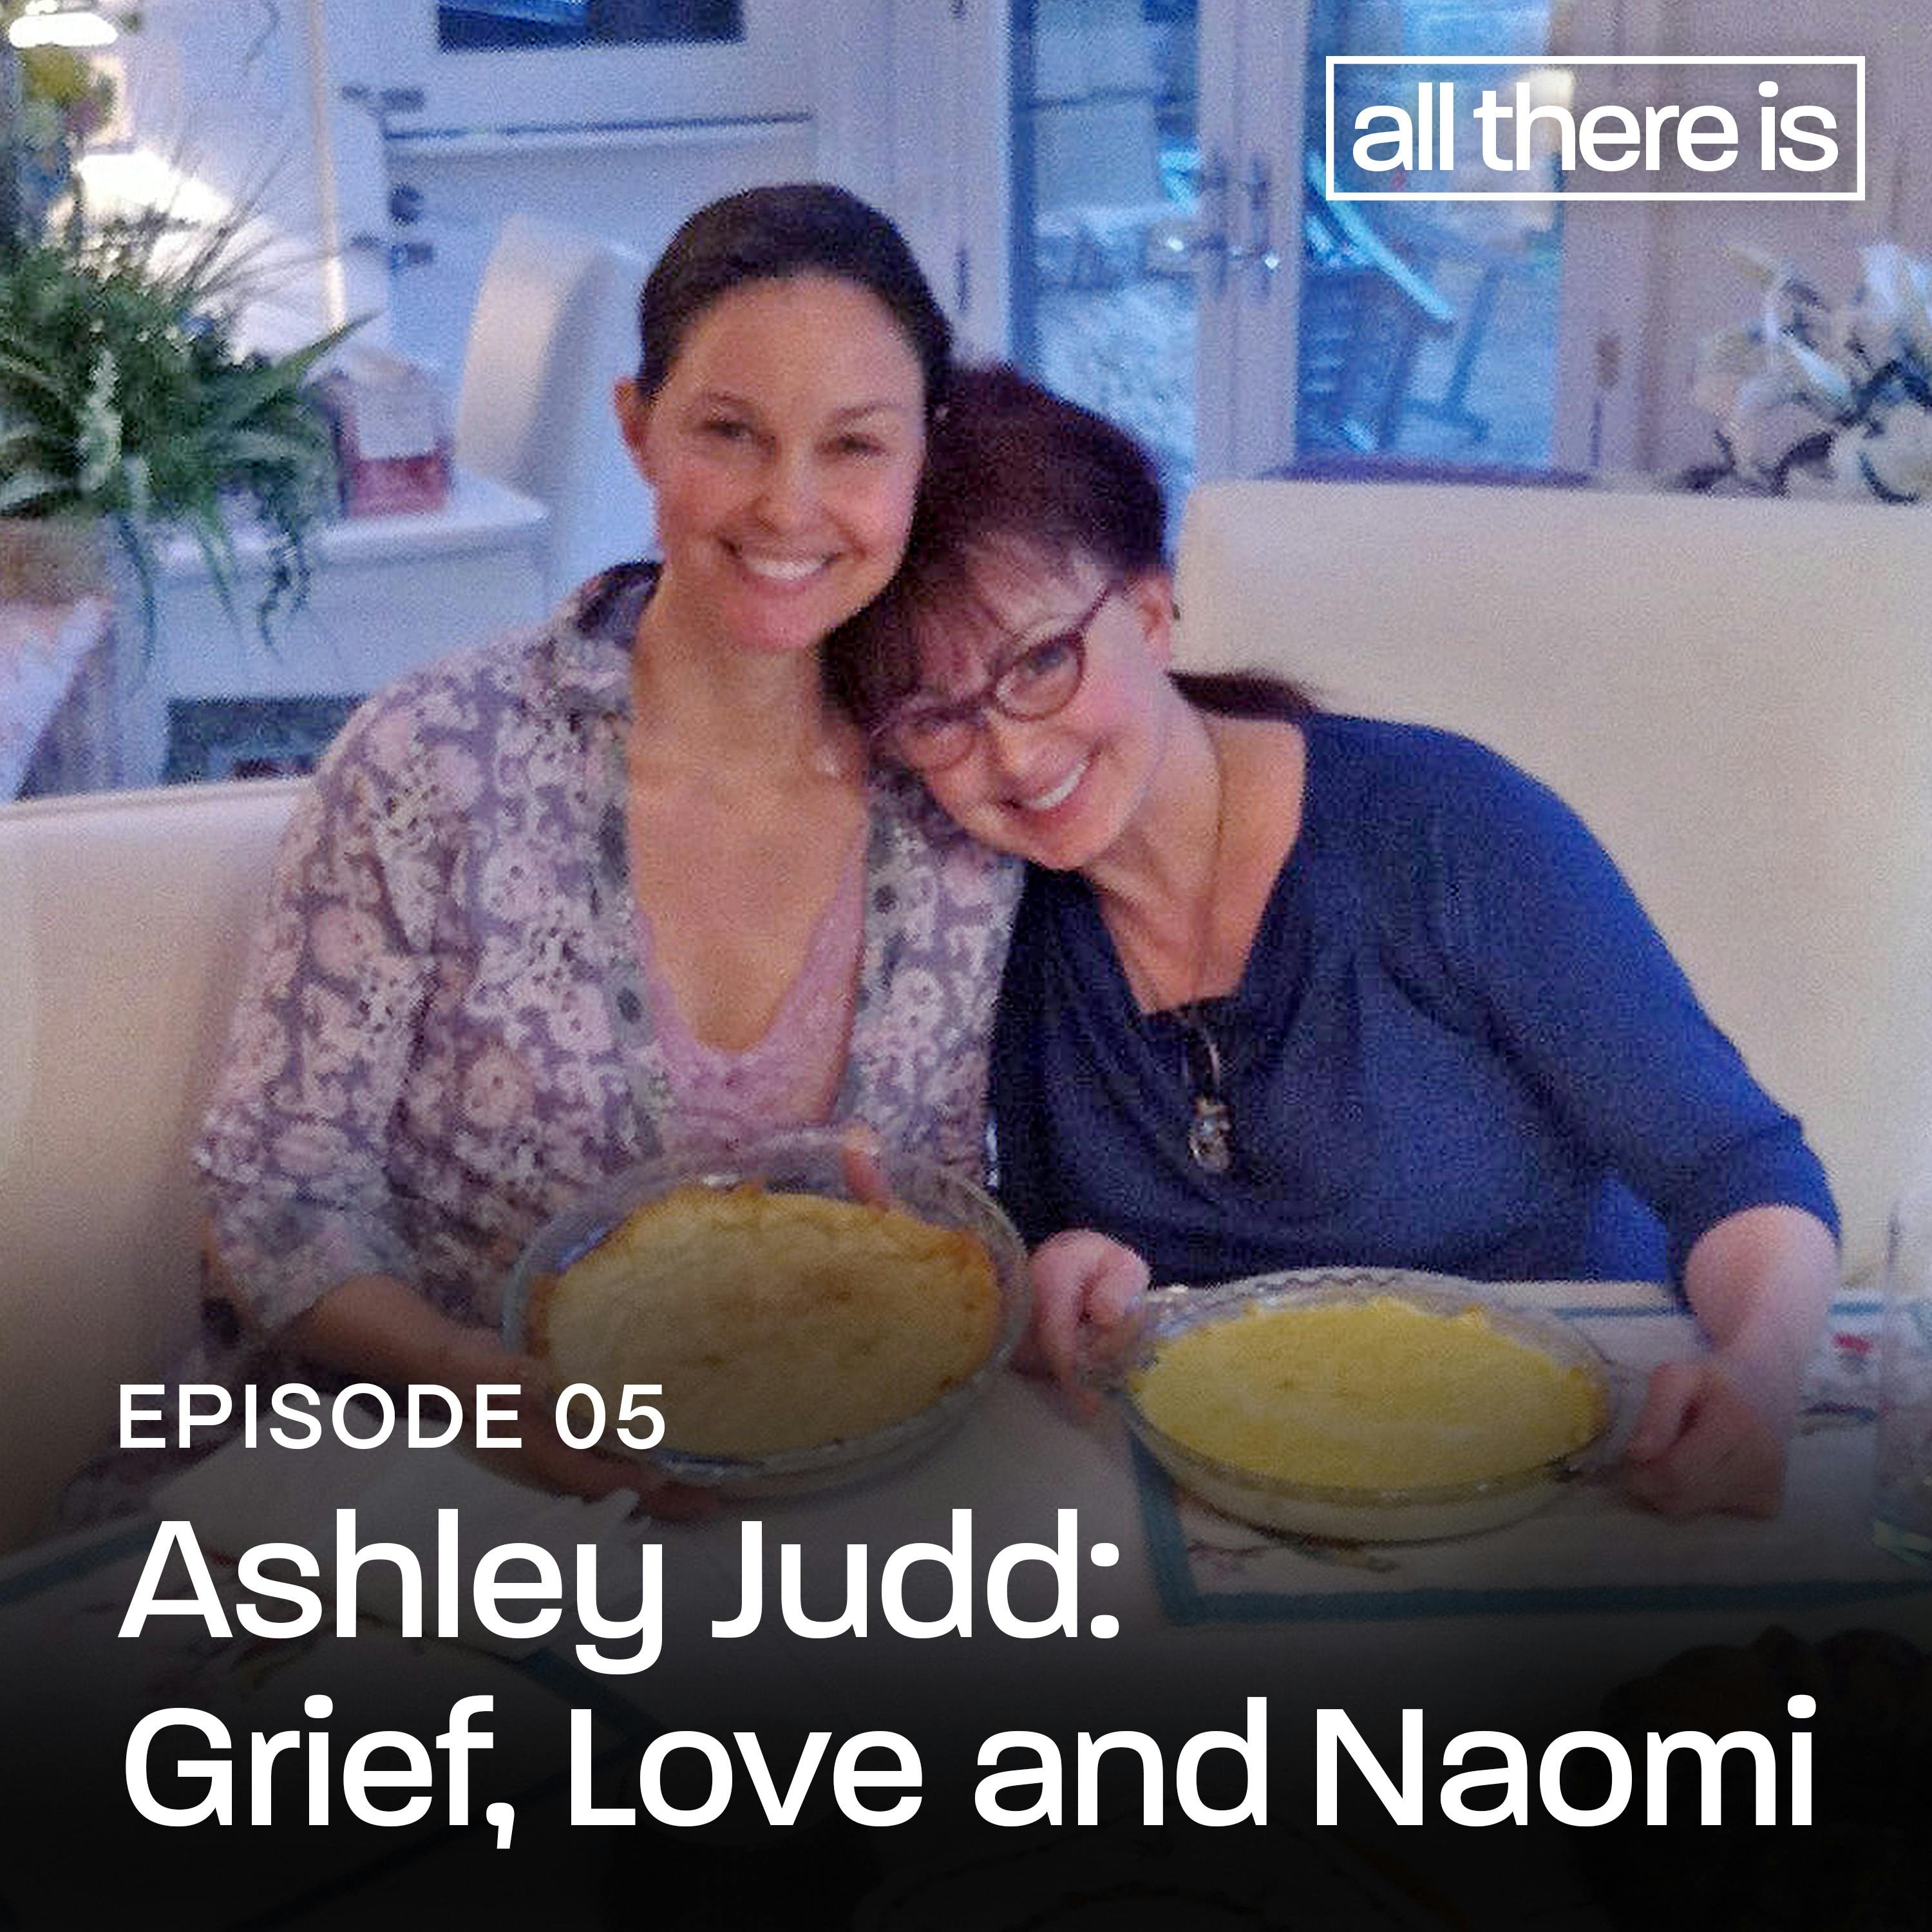 Ashley Judd: Grief, Love and Naomi